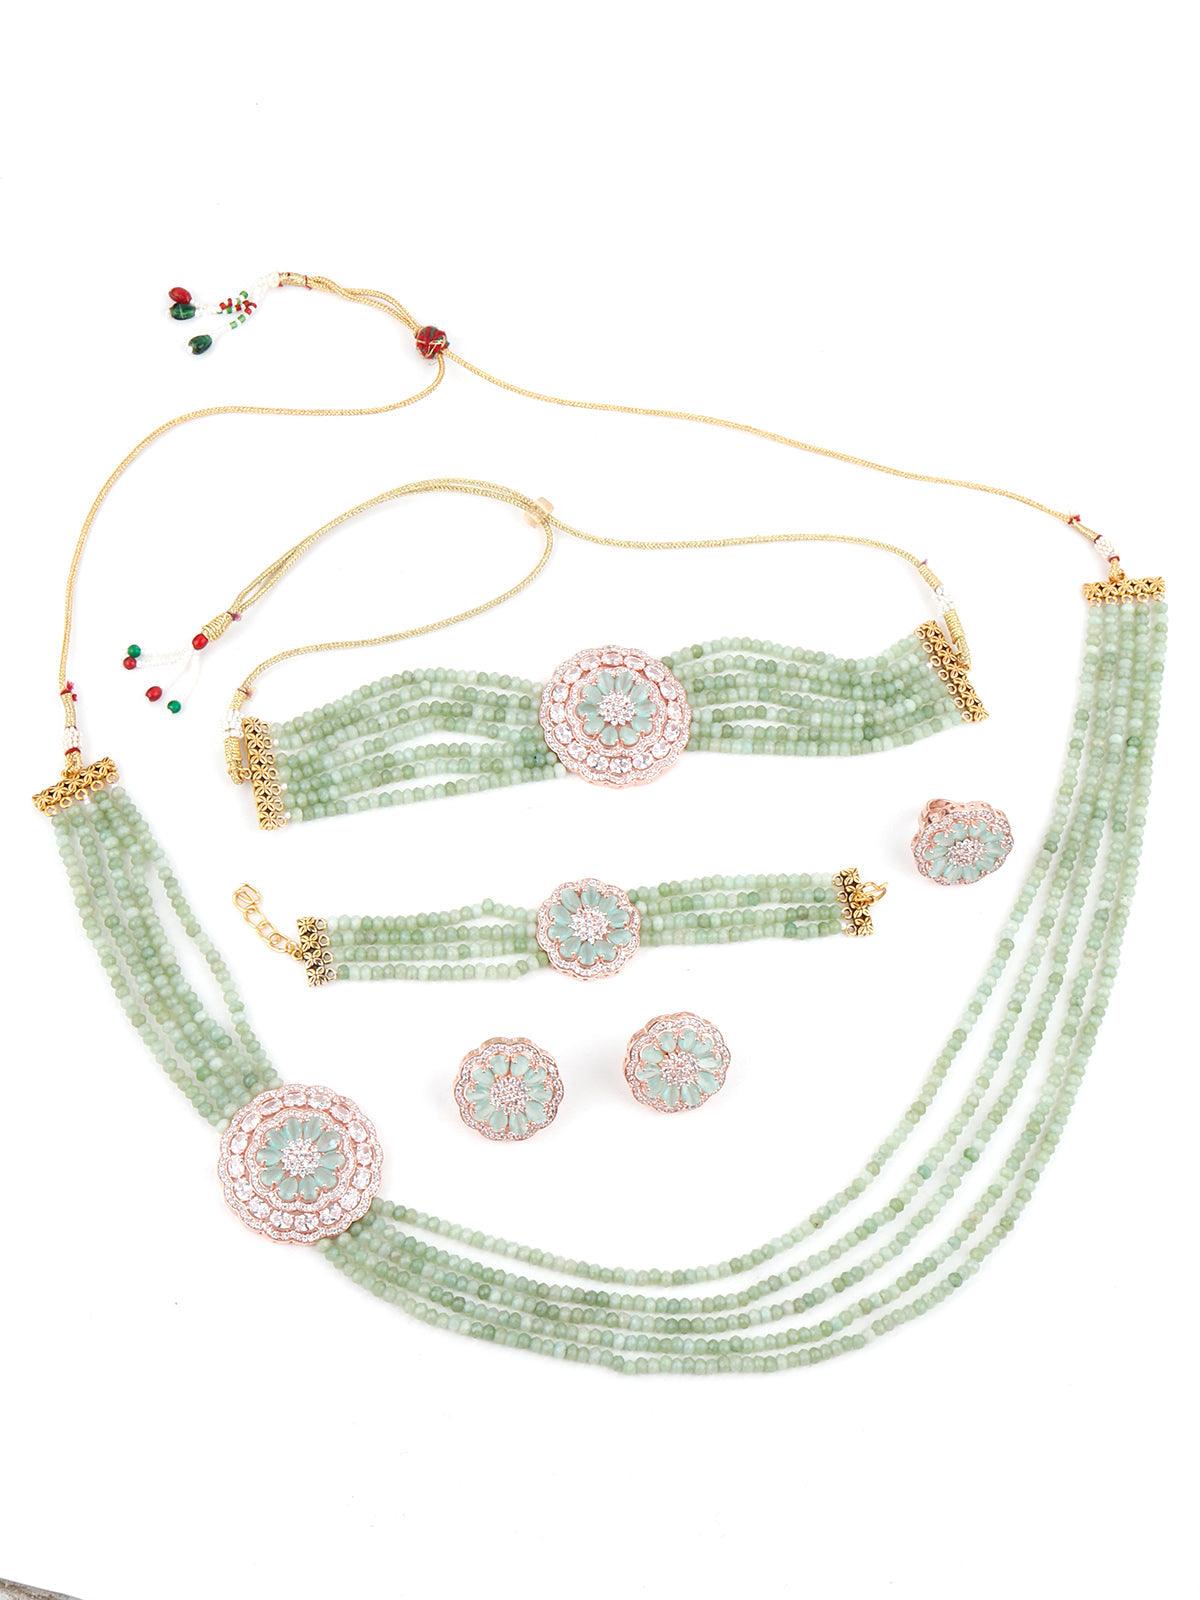 Soothing Green Onyx Choker with Necklace Set - Odette